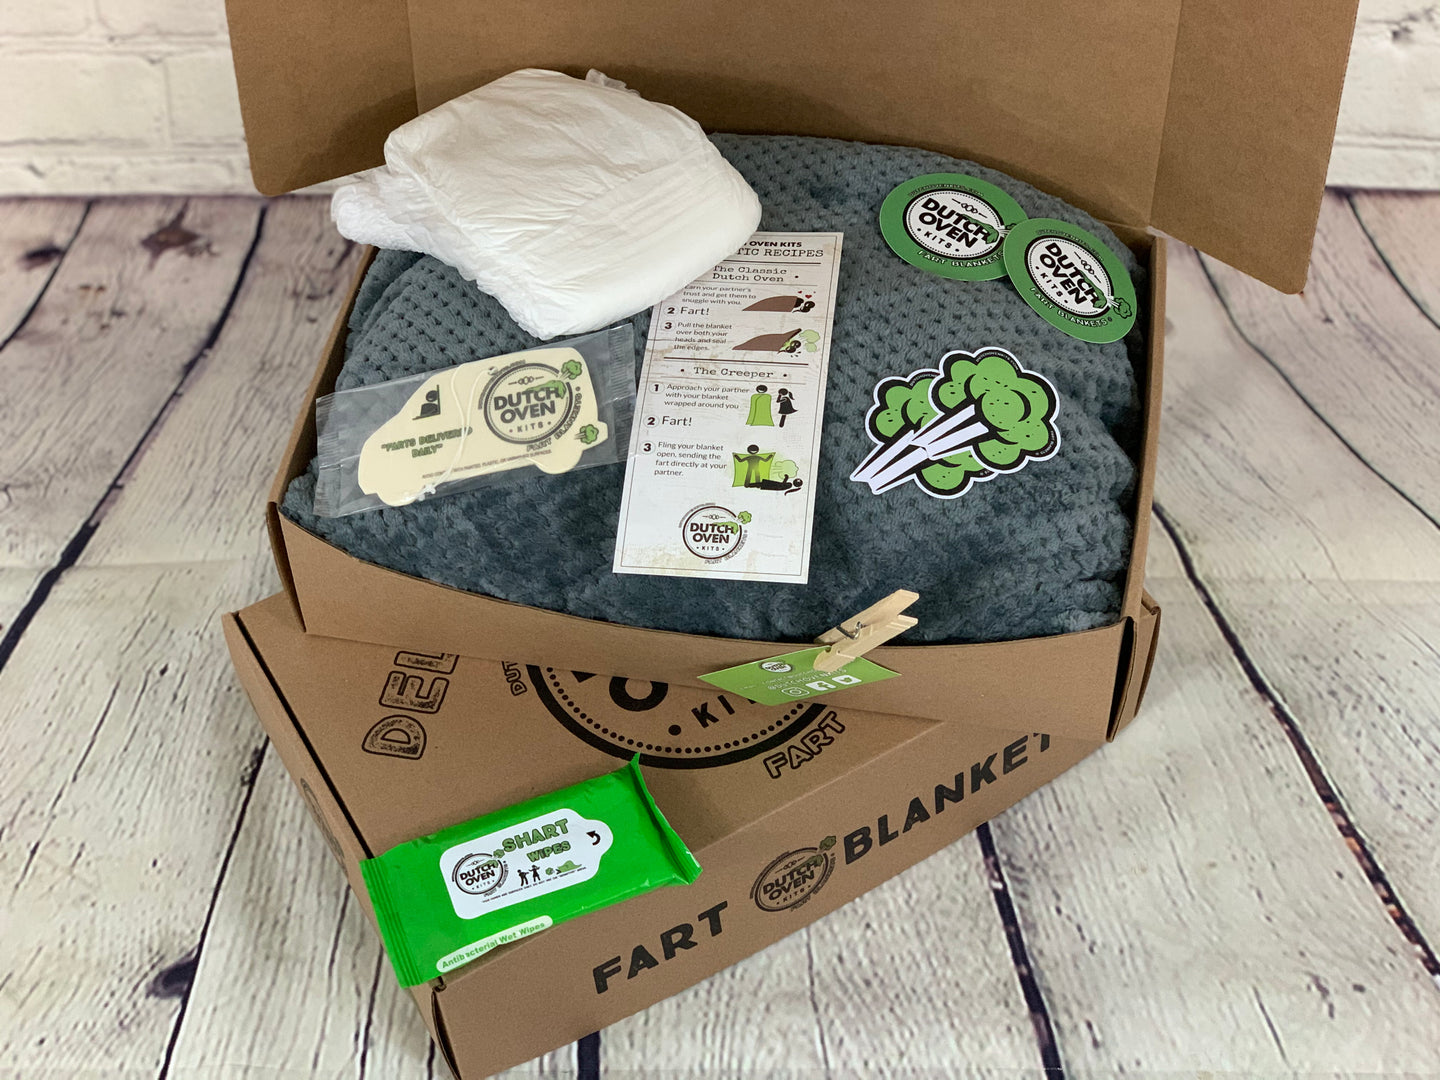 picture of a gray blanket in a box with an adult diaper, air freshener, pack of shart wipes, fart recipe card and stickers.